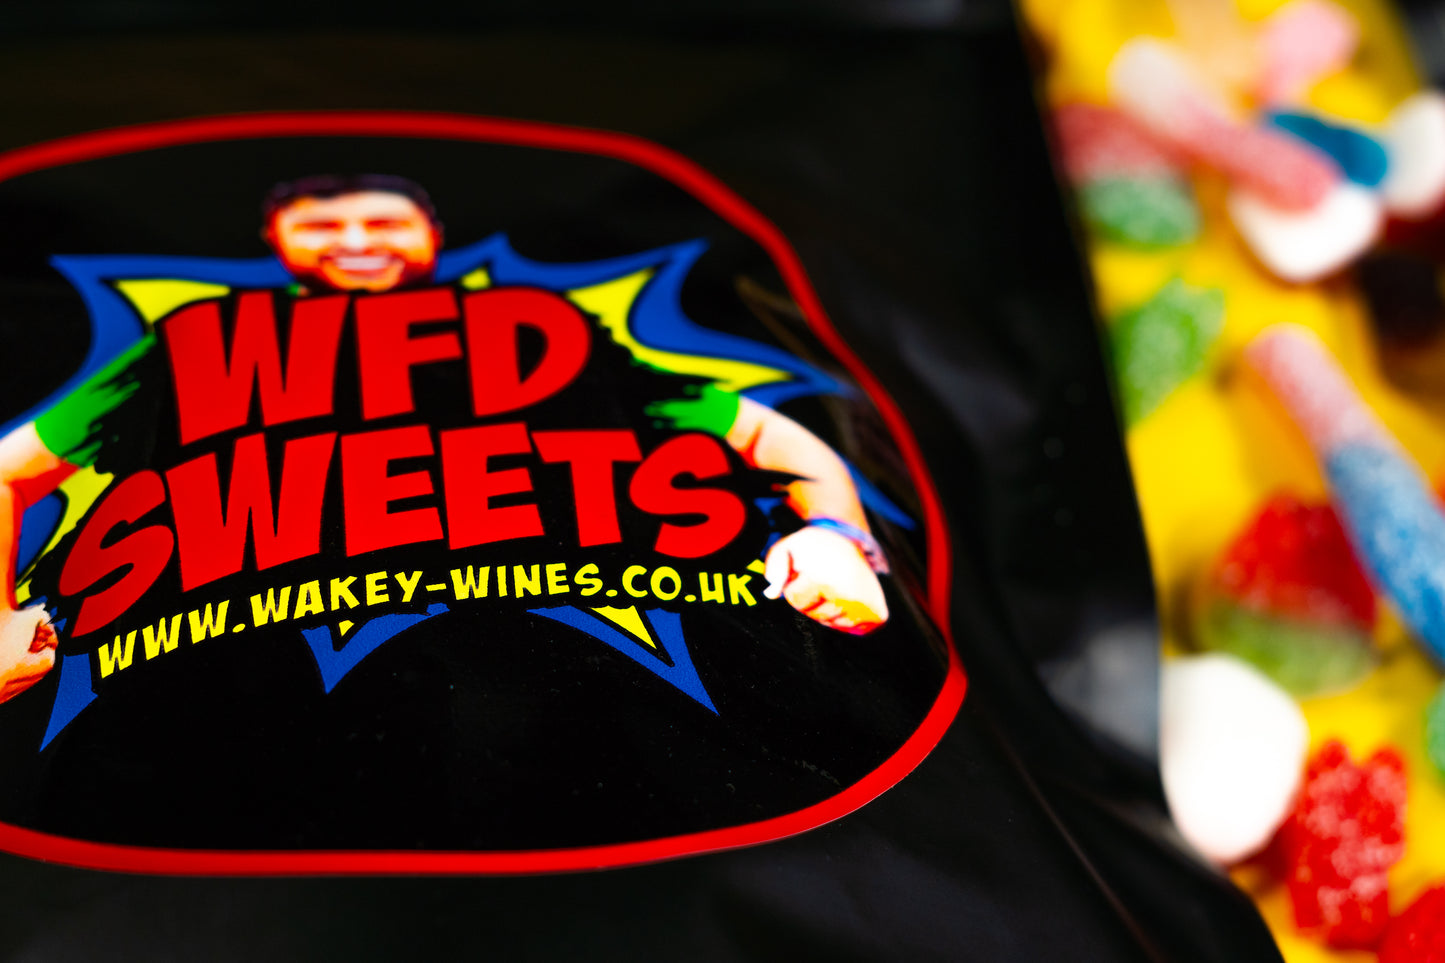 WFD sweets 1kg (classic mix)